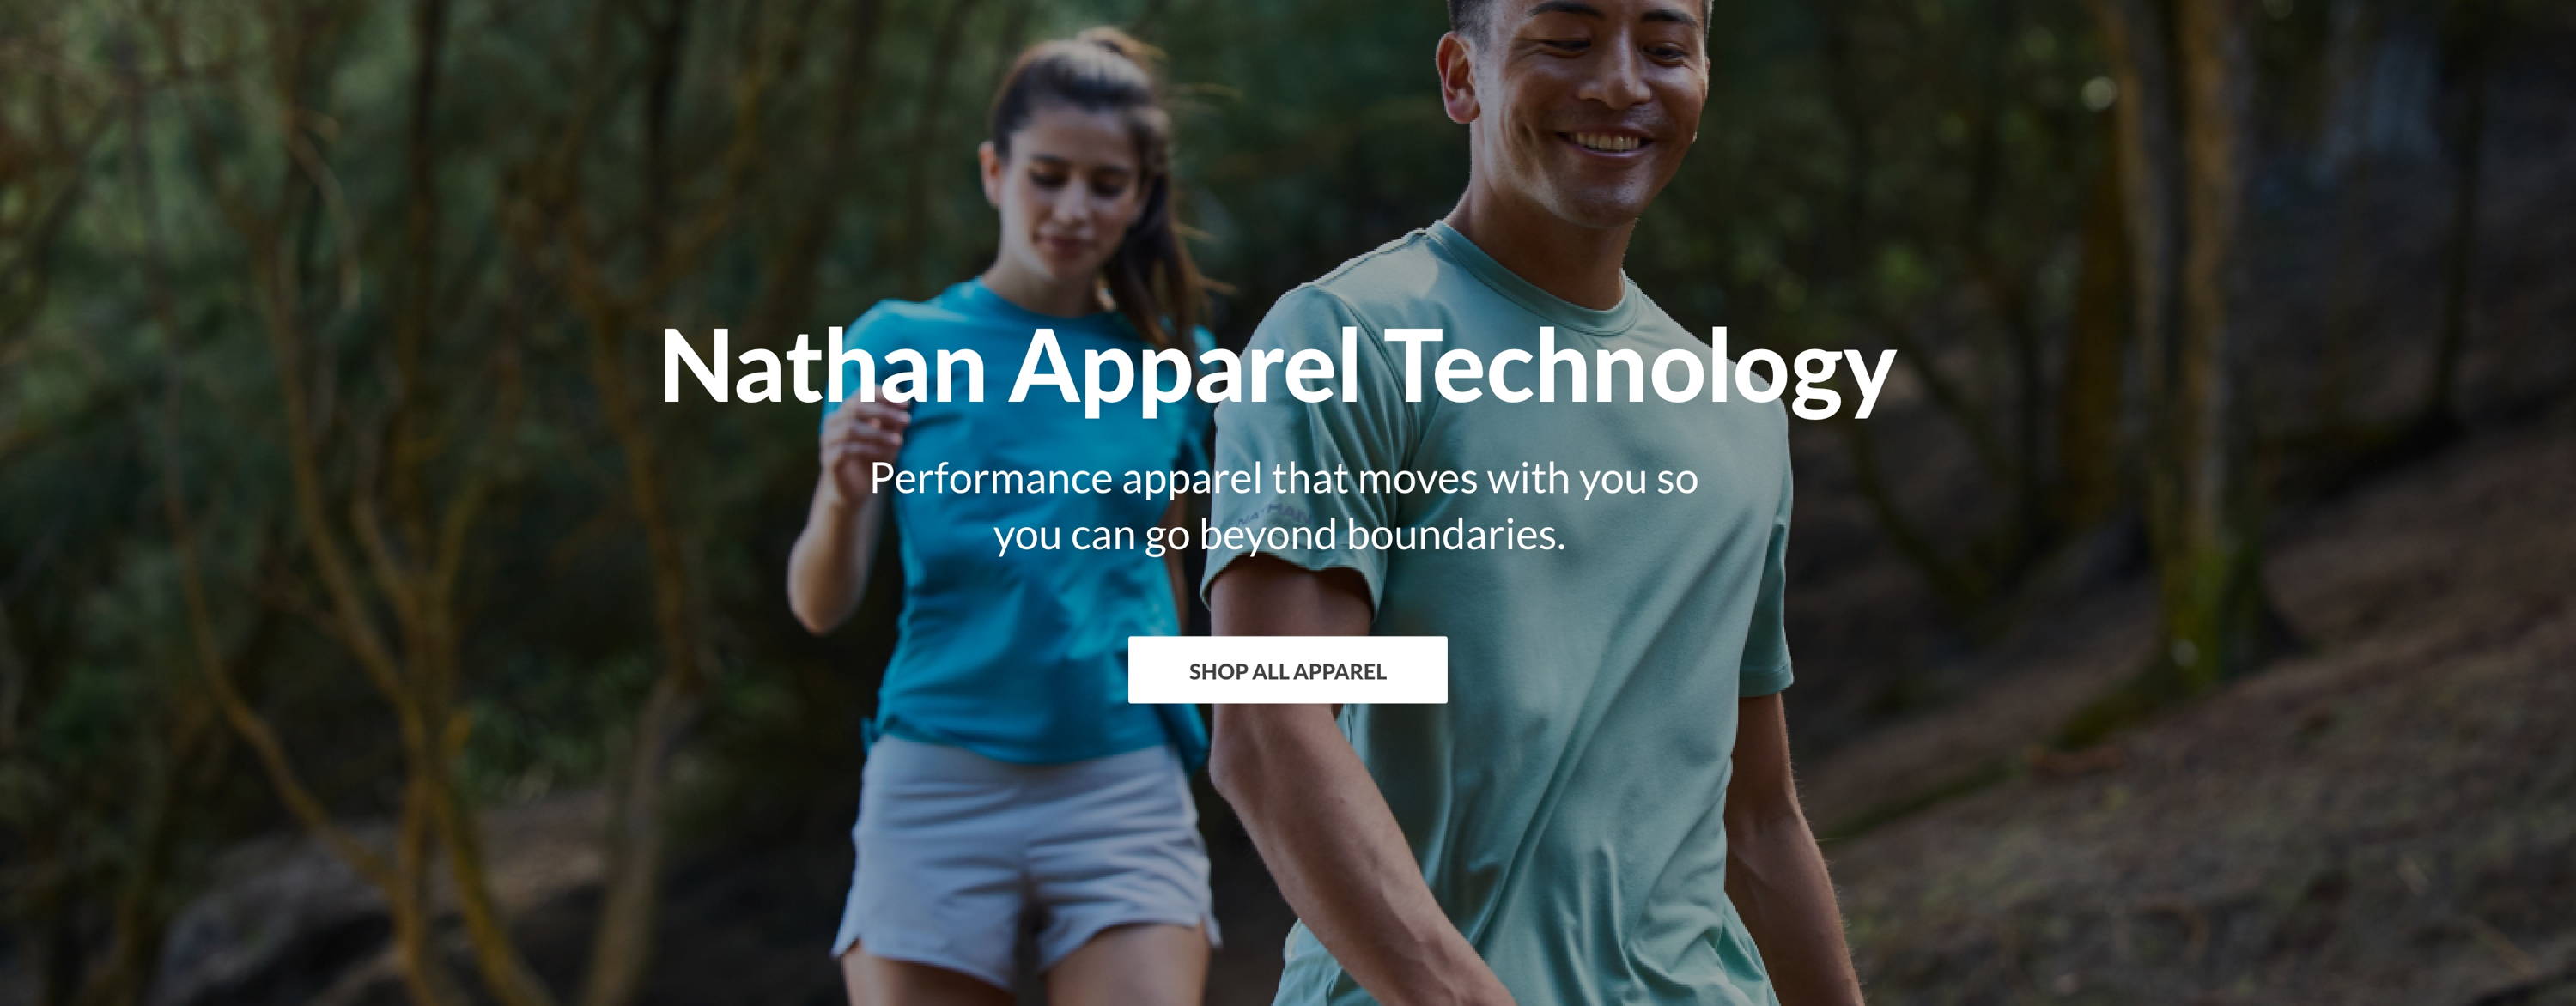 Nathan Apparel Technology - Performance apparel that moves with you so you can go beyond boundaries - Shop All Apparel